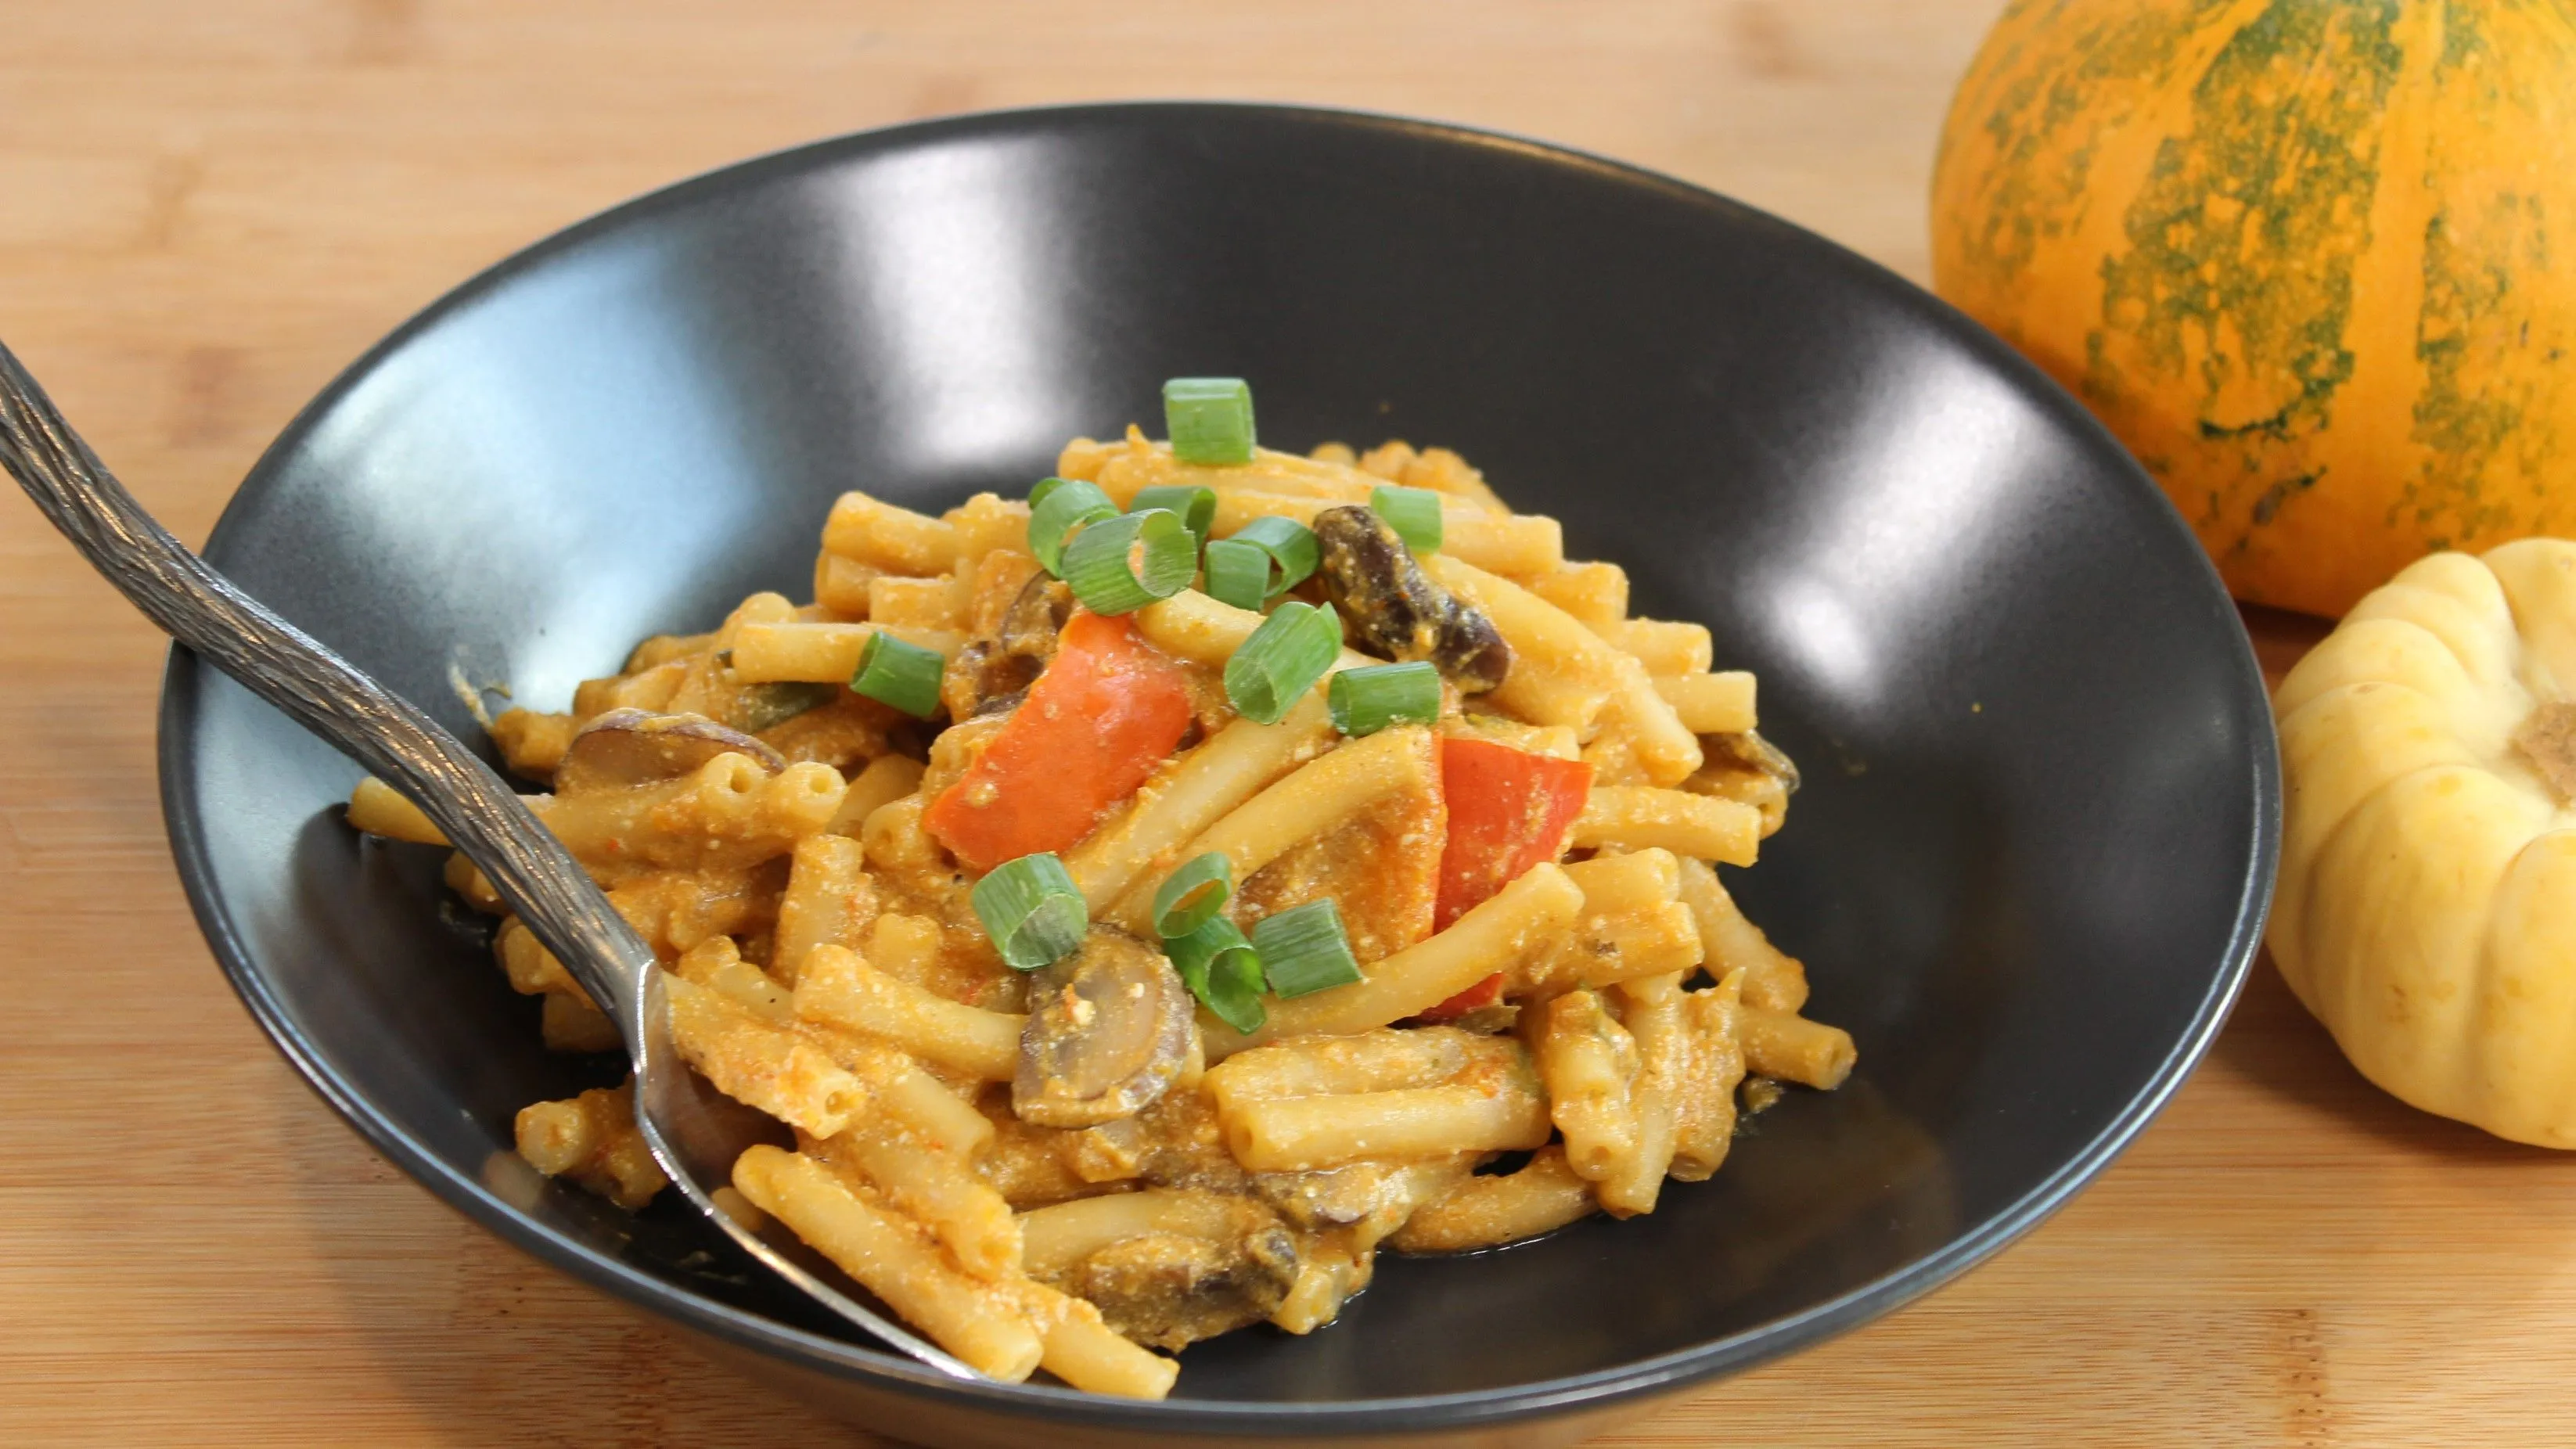 Pasta with pumpkin and mushrooms: Delicious pasta recipe for fall